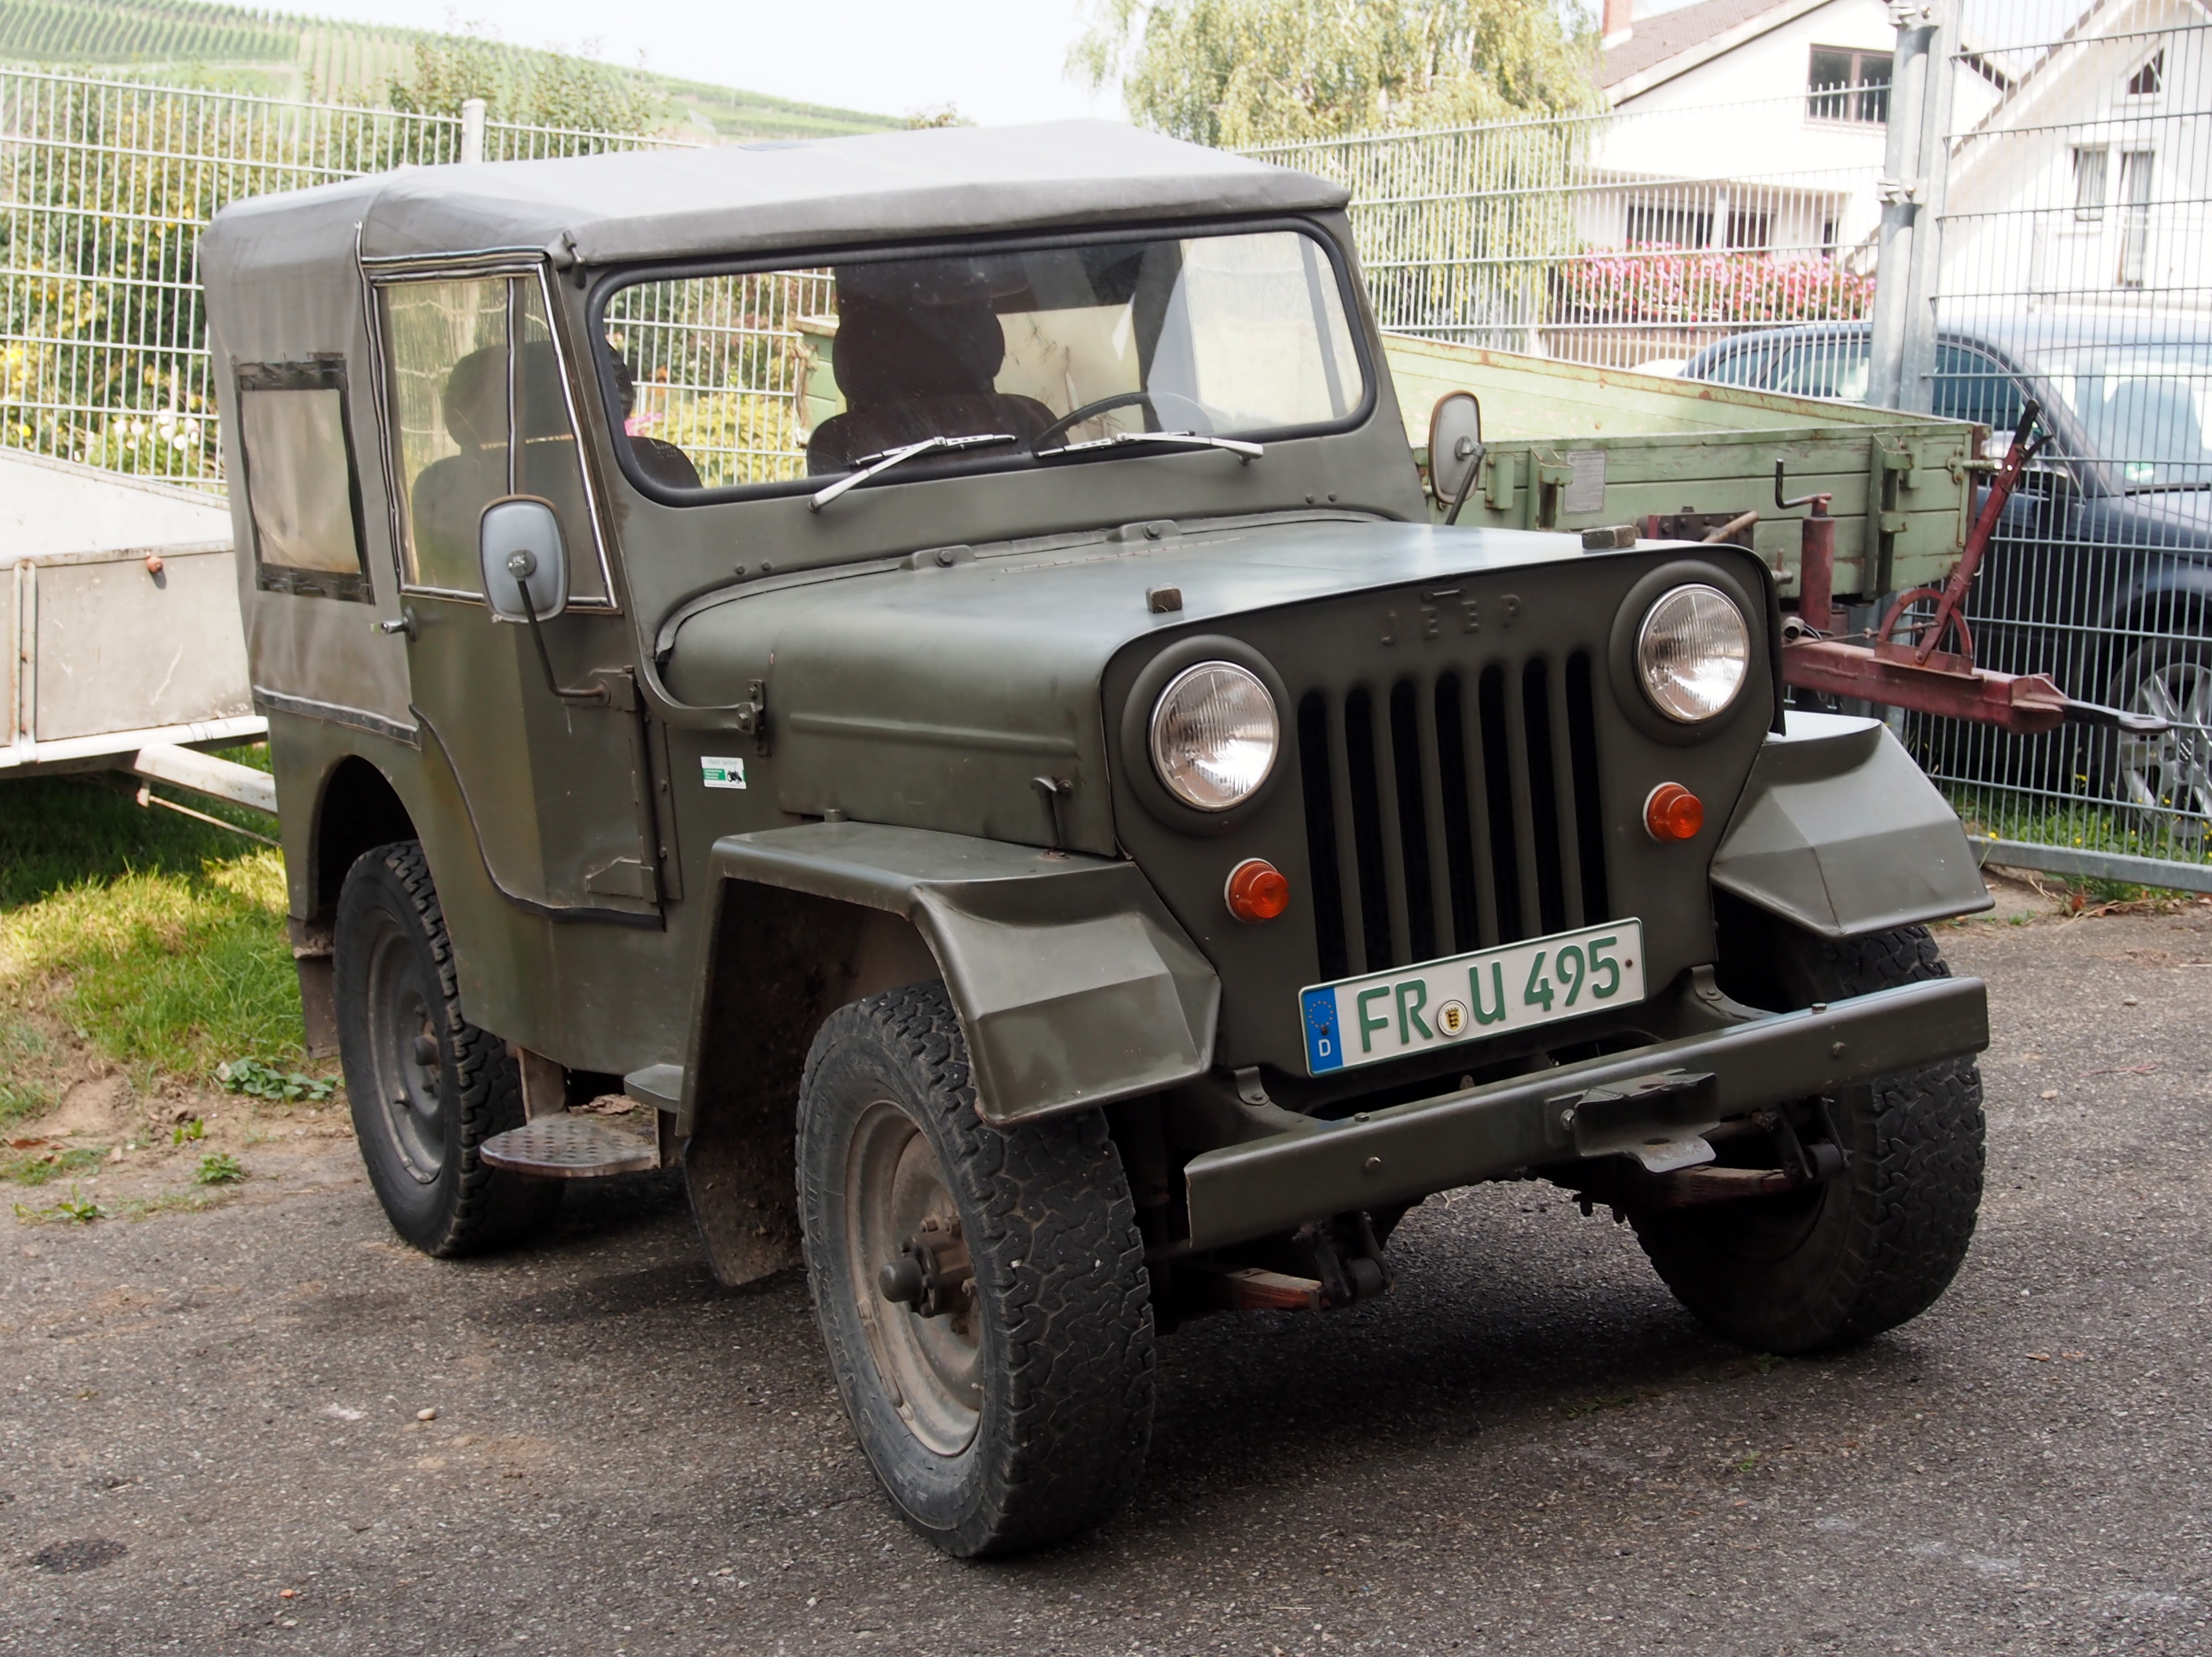 File:Old Jeep in France, pic2.JPG - Wikimedia Commons